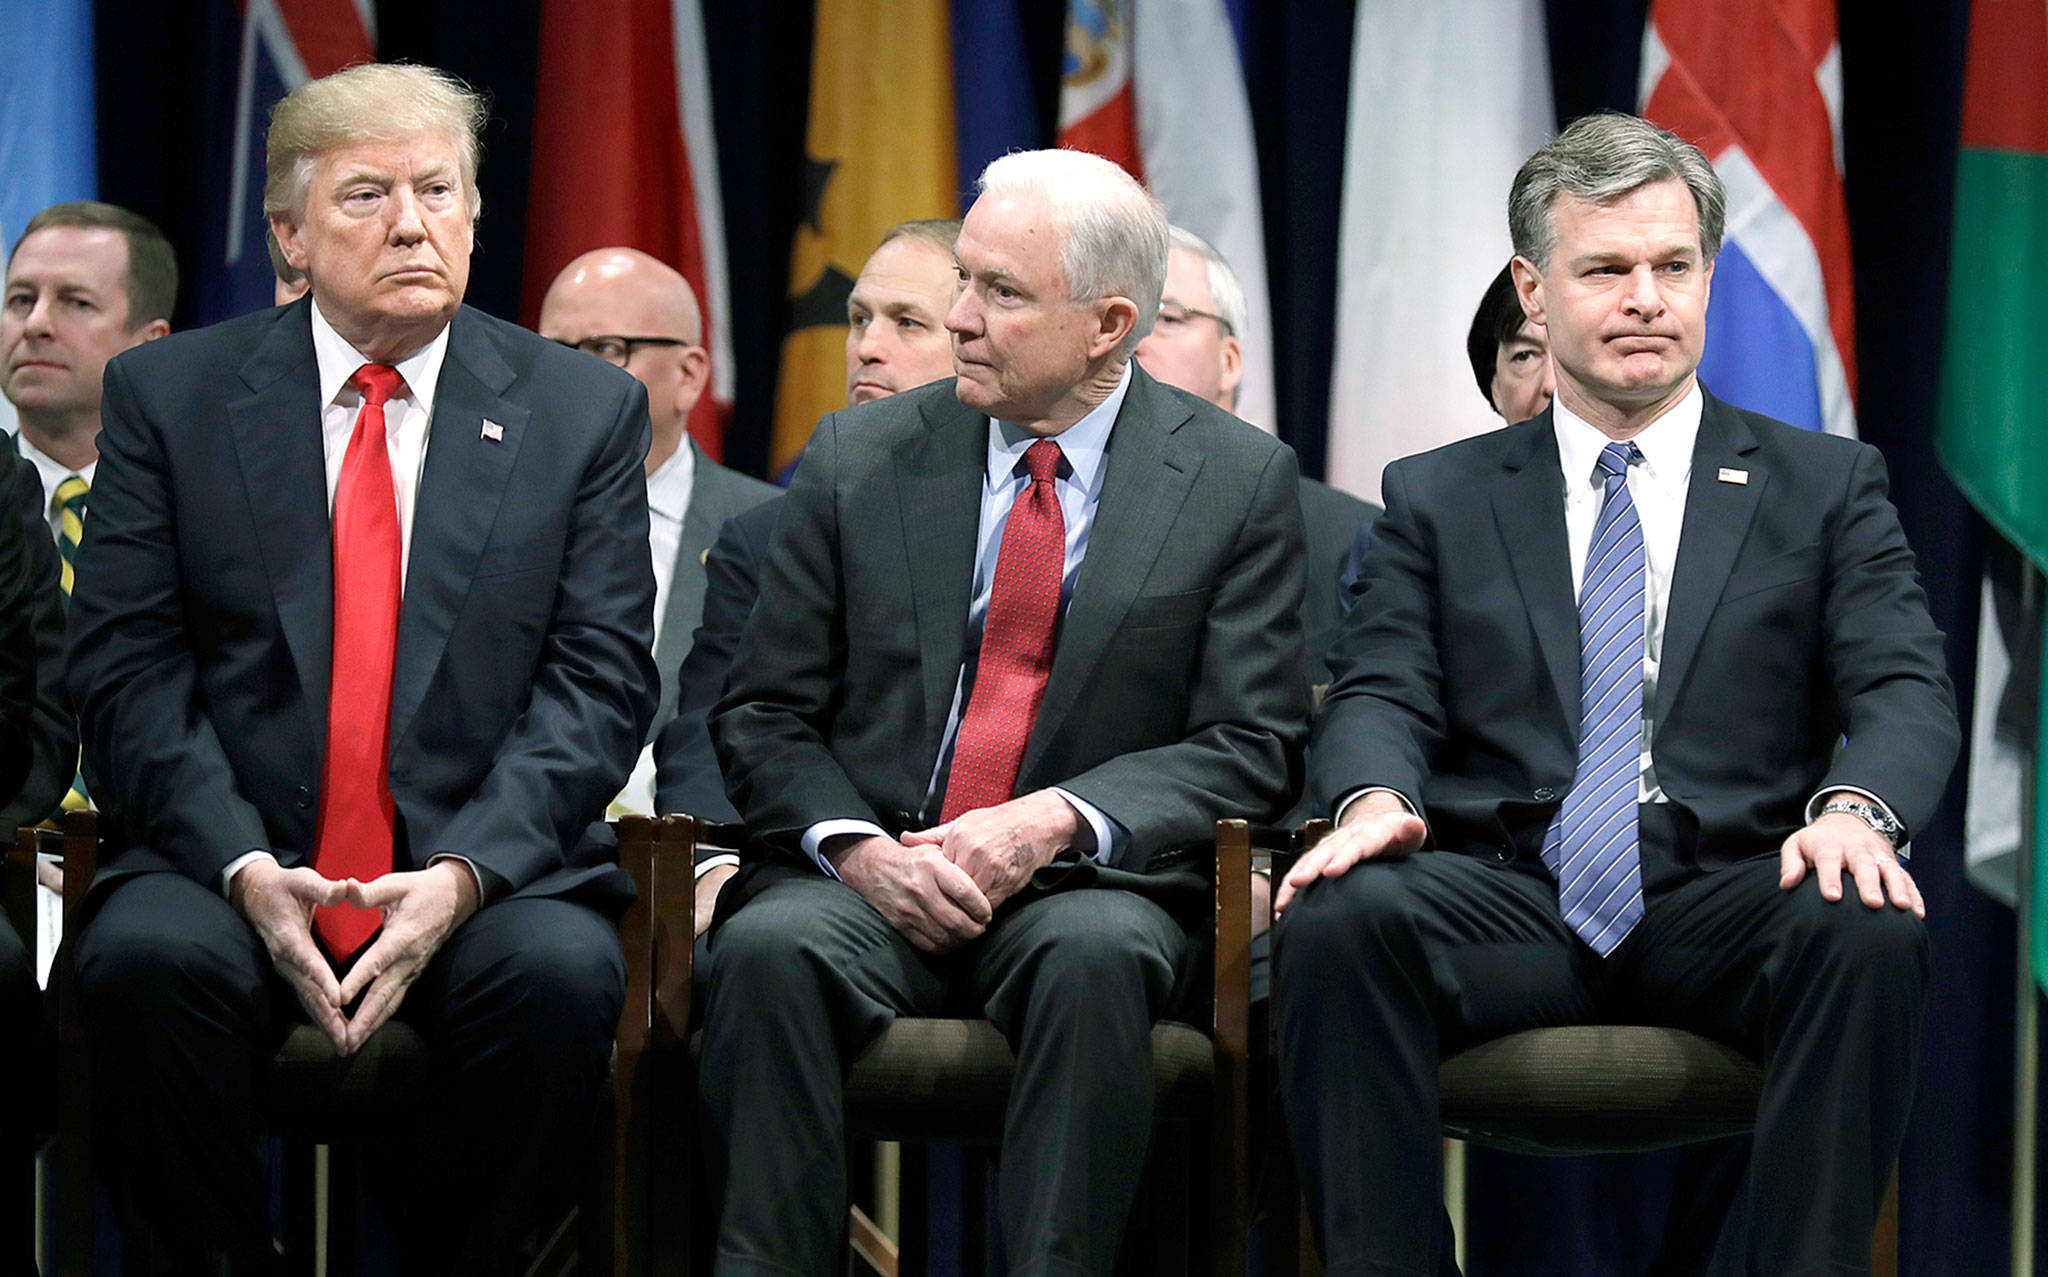 President Donald Trump, Attorney General Jeff Sessions (center) and FBI Director Christopher Wray (right) at the FBI National Academy graduation ceremony on Friday in Quantico, Virginia. (AP Photo/Evan Vucci)